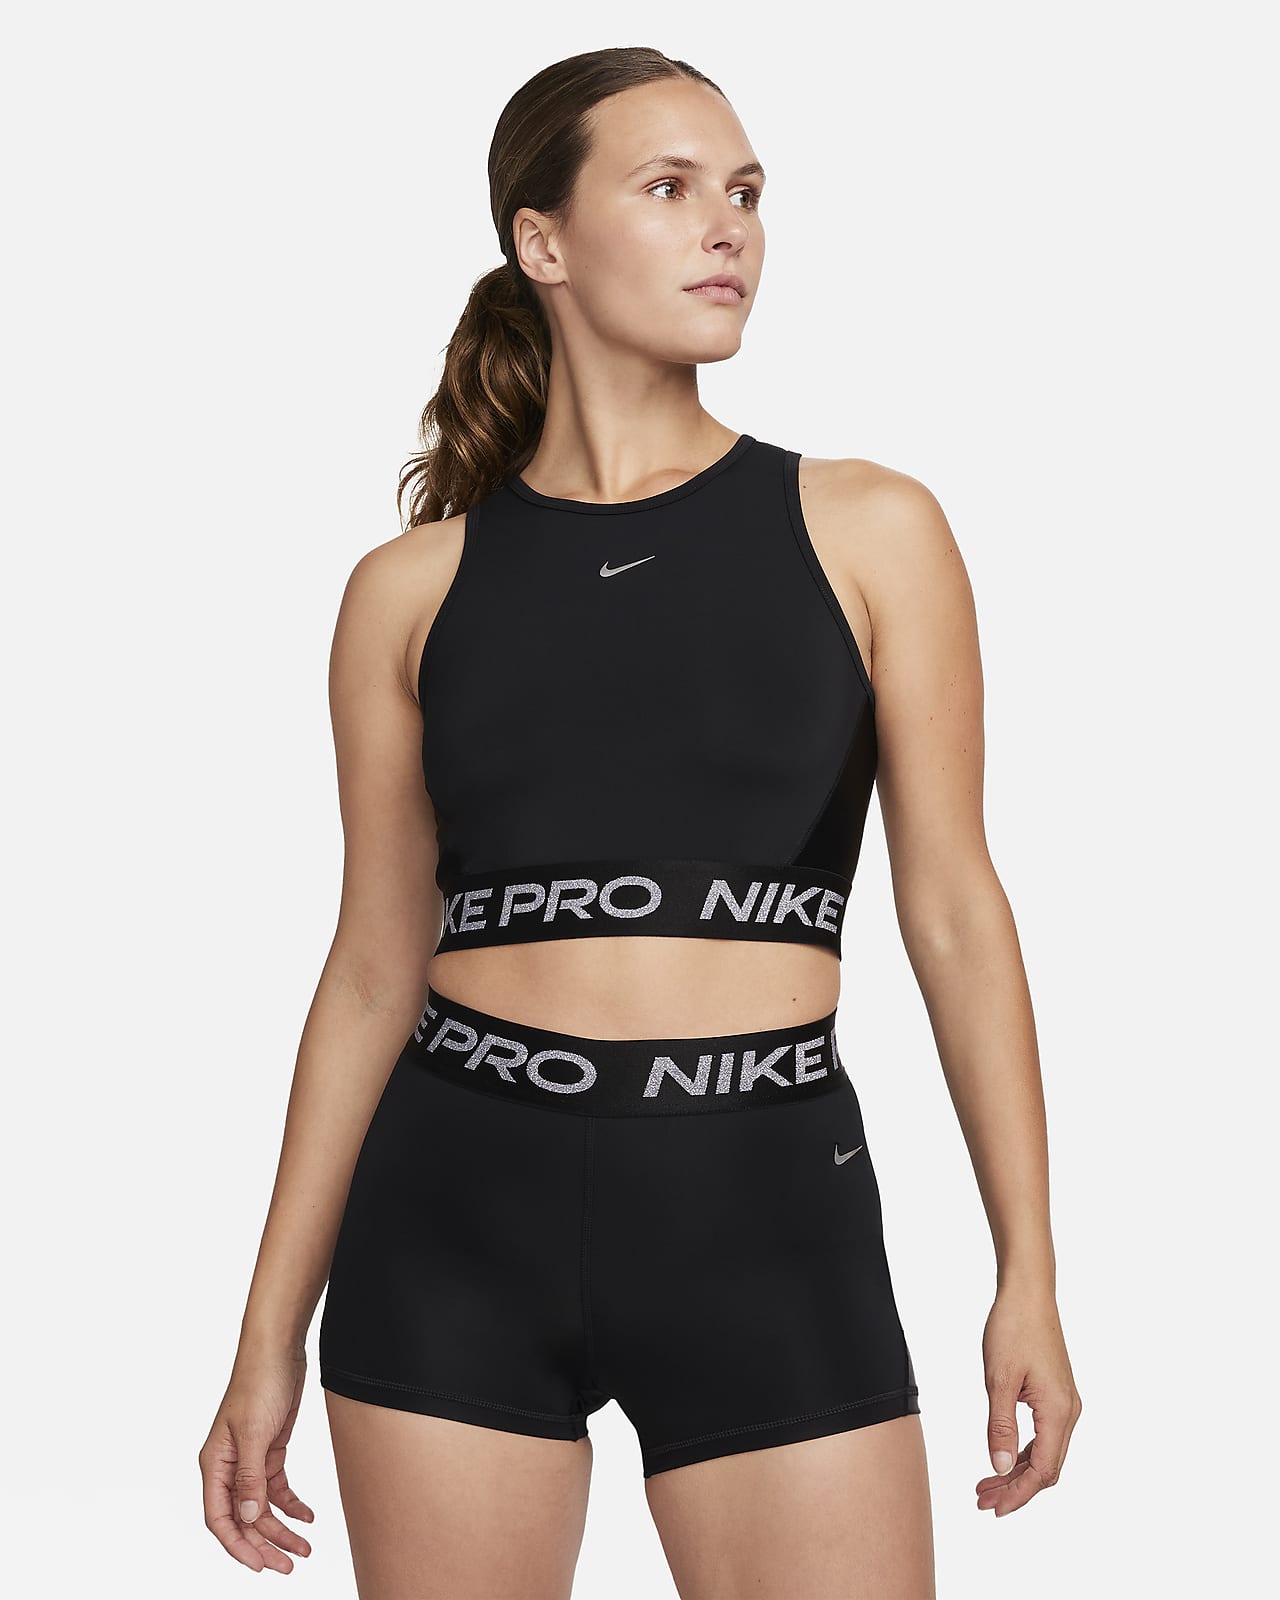 https://static.nike.com/a/images/t_PDP_1280_v1/f_auto,q_auto:eco/c18bdf2f-8b3b-4472-9e15-77152d56c52f/pro-dri-fit-cropped-tank-top-ClgWGF.png